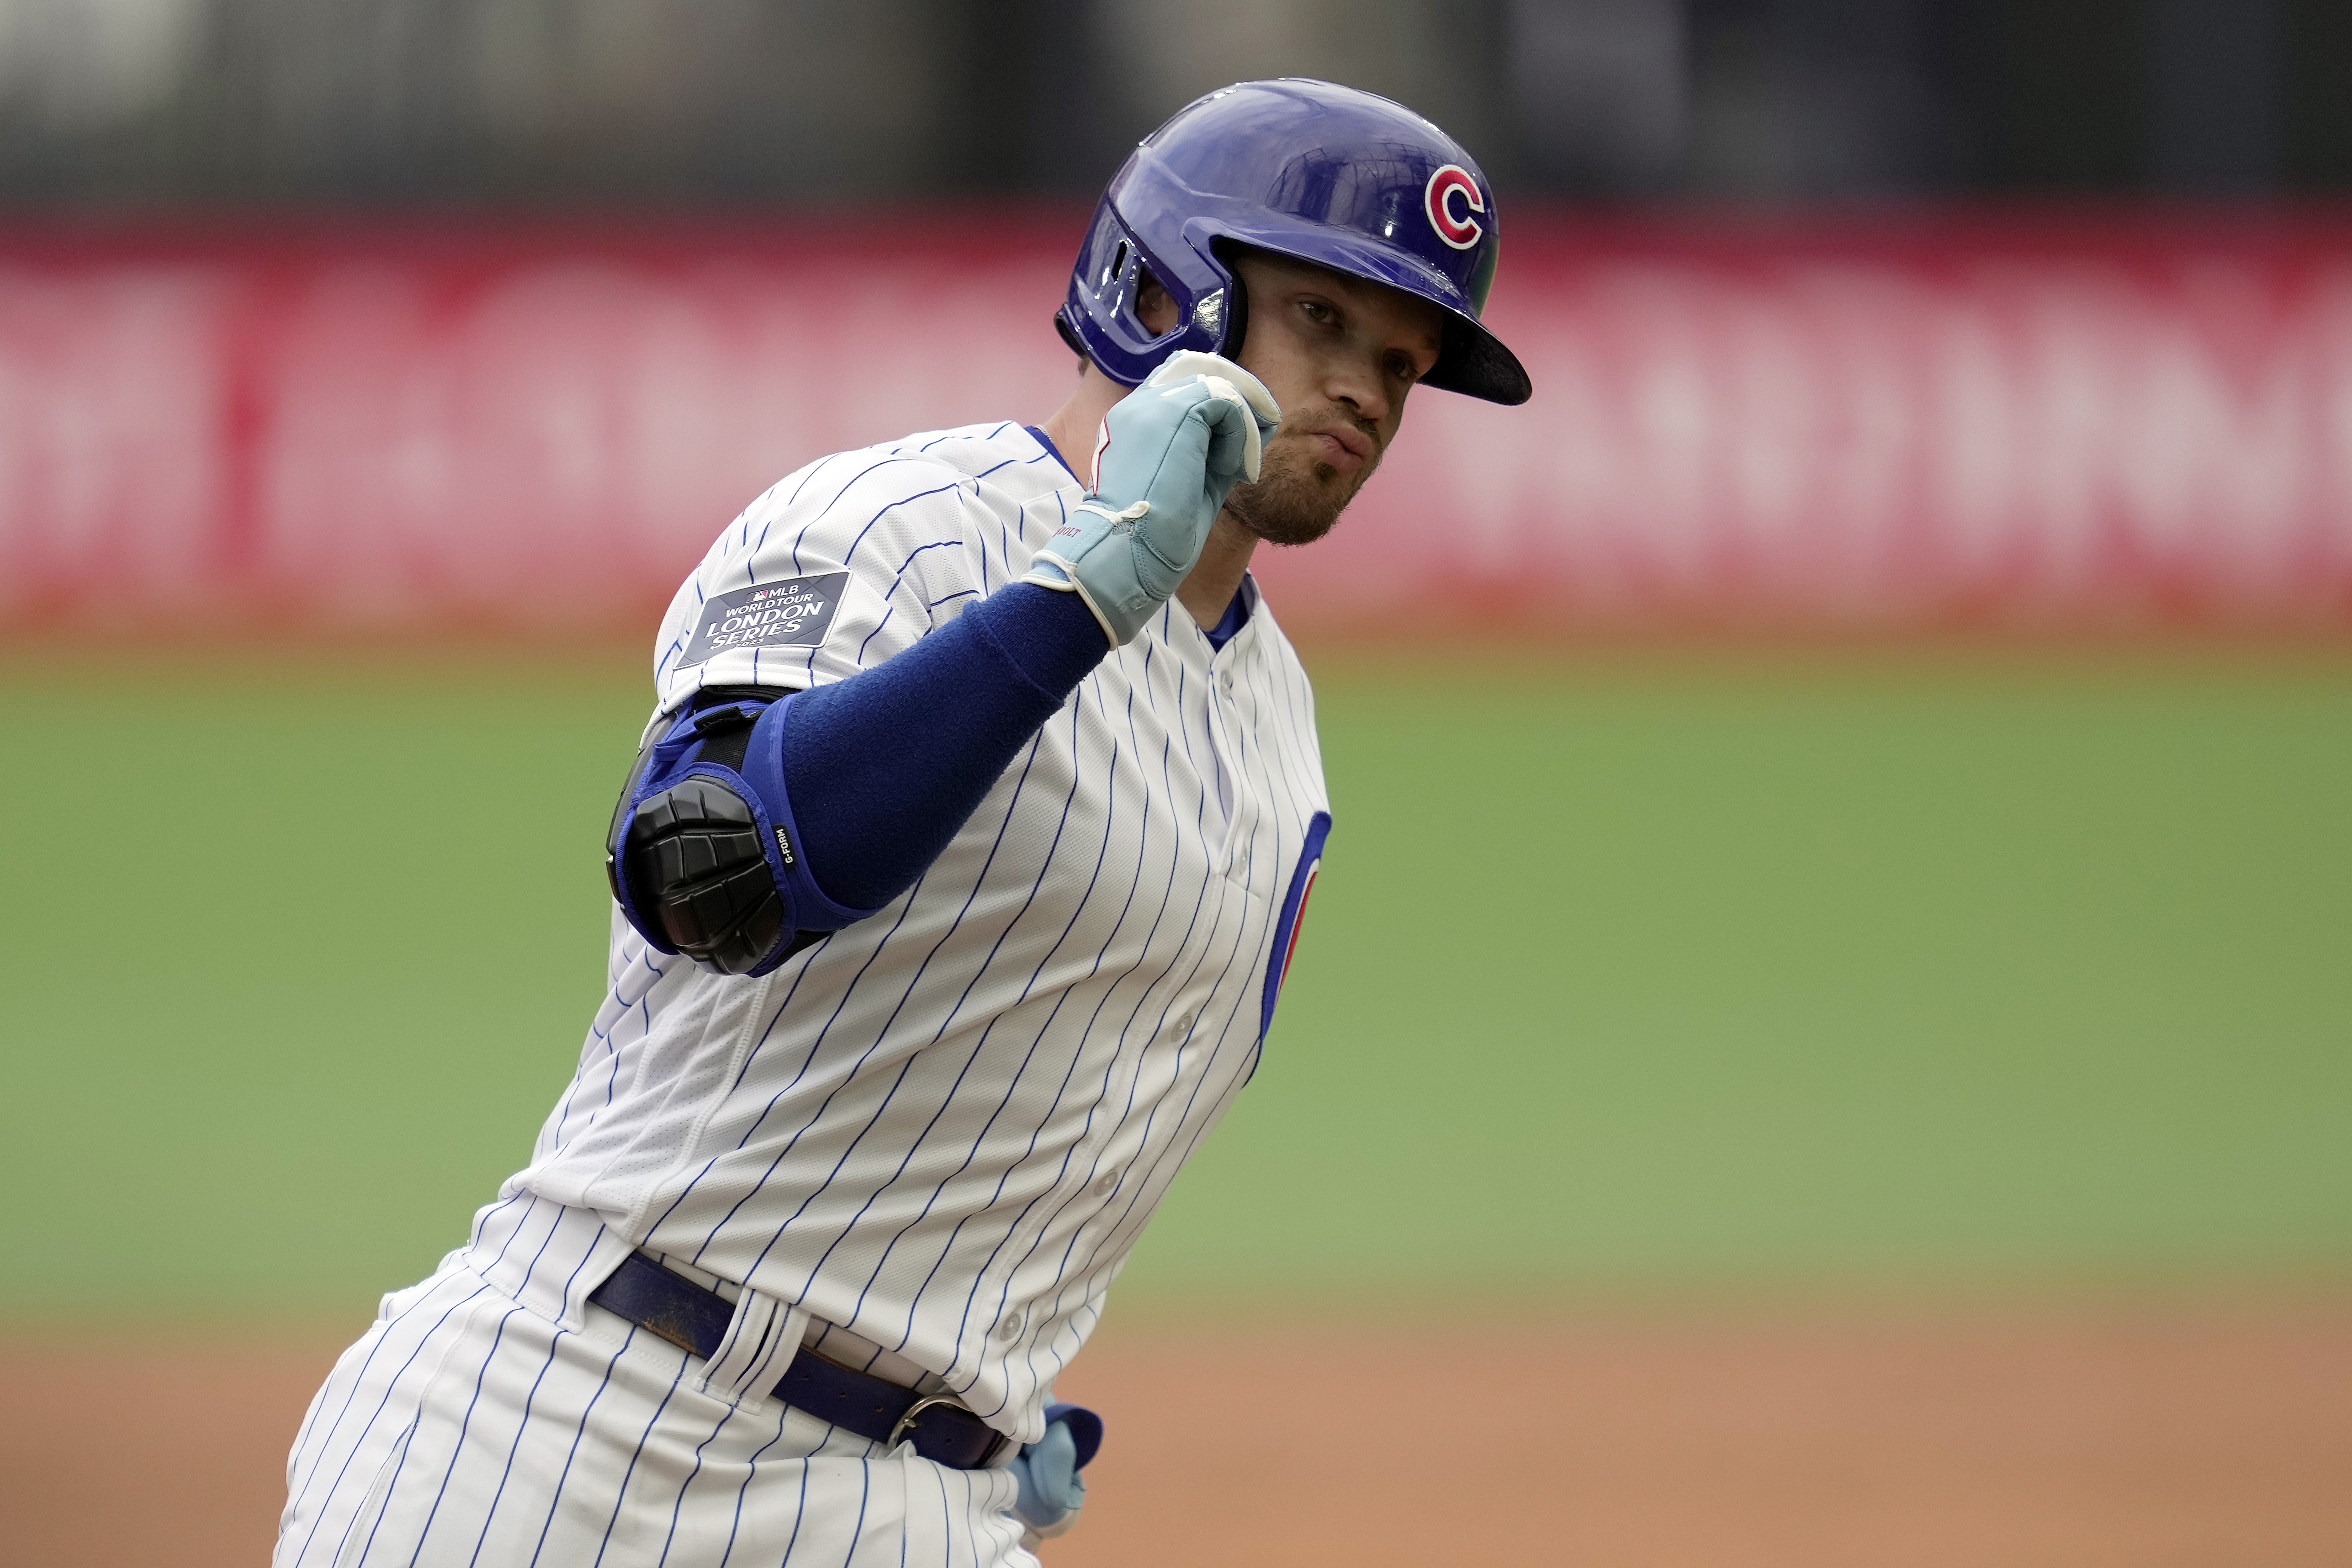 London Series: Ian Happ's 2 HRs fuel Chicago Cubs' 9-1 win